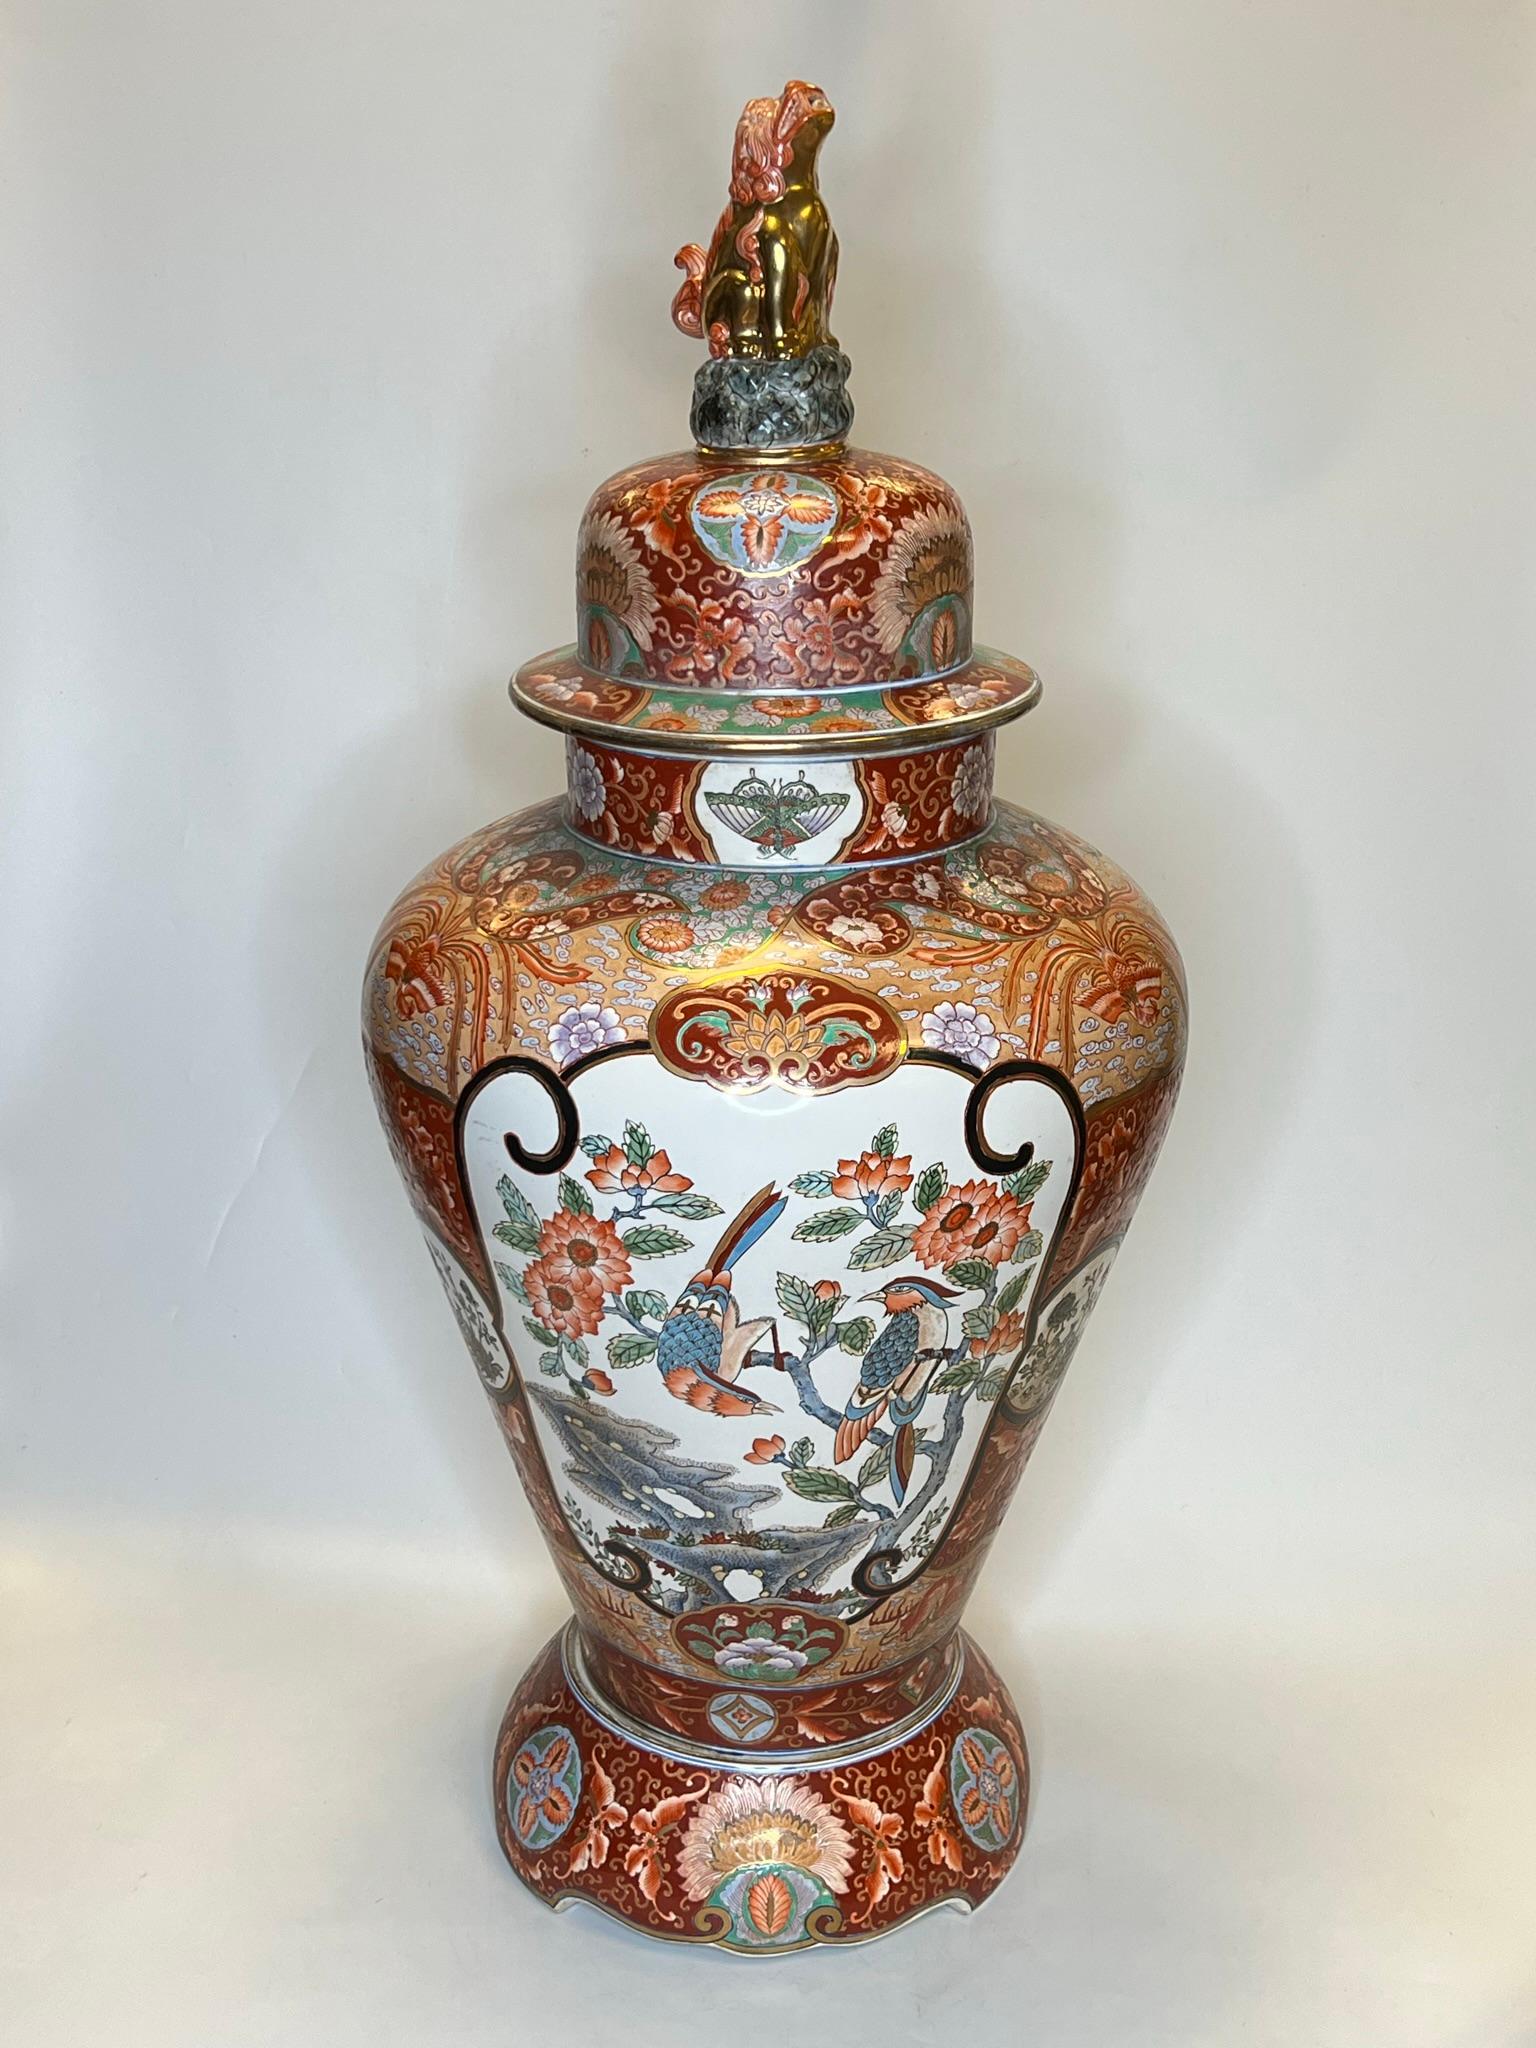 Palatial 19th Century Chinese Porcelain Vase with Cover and Pedestal in the Qianlong style, with lovely floral and bird cartouches on rust red ground.  With Qianlong mark on underside of vase.